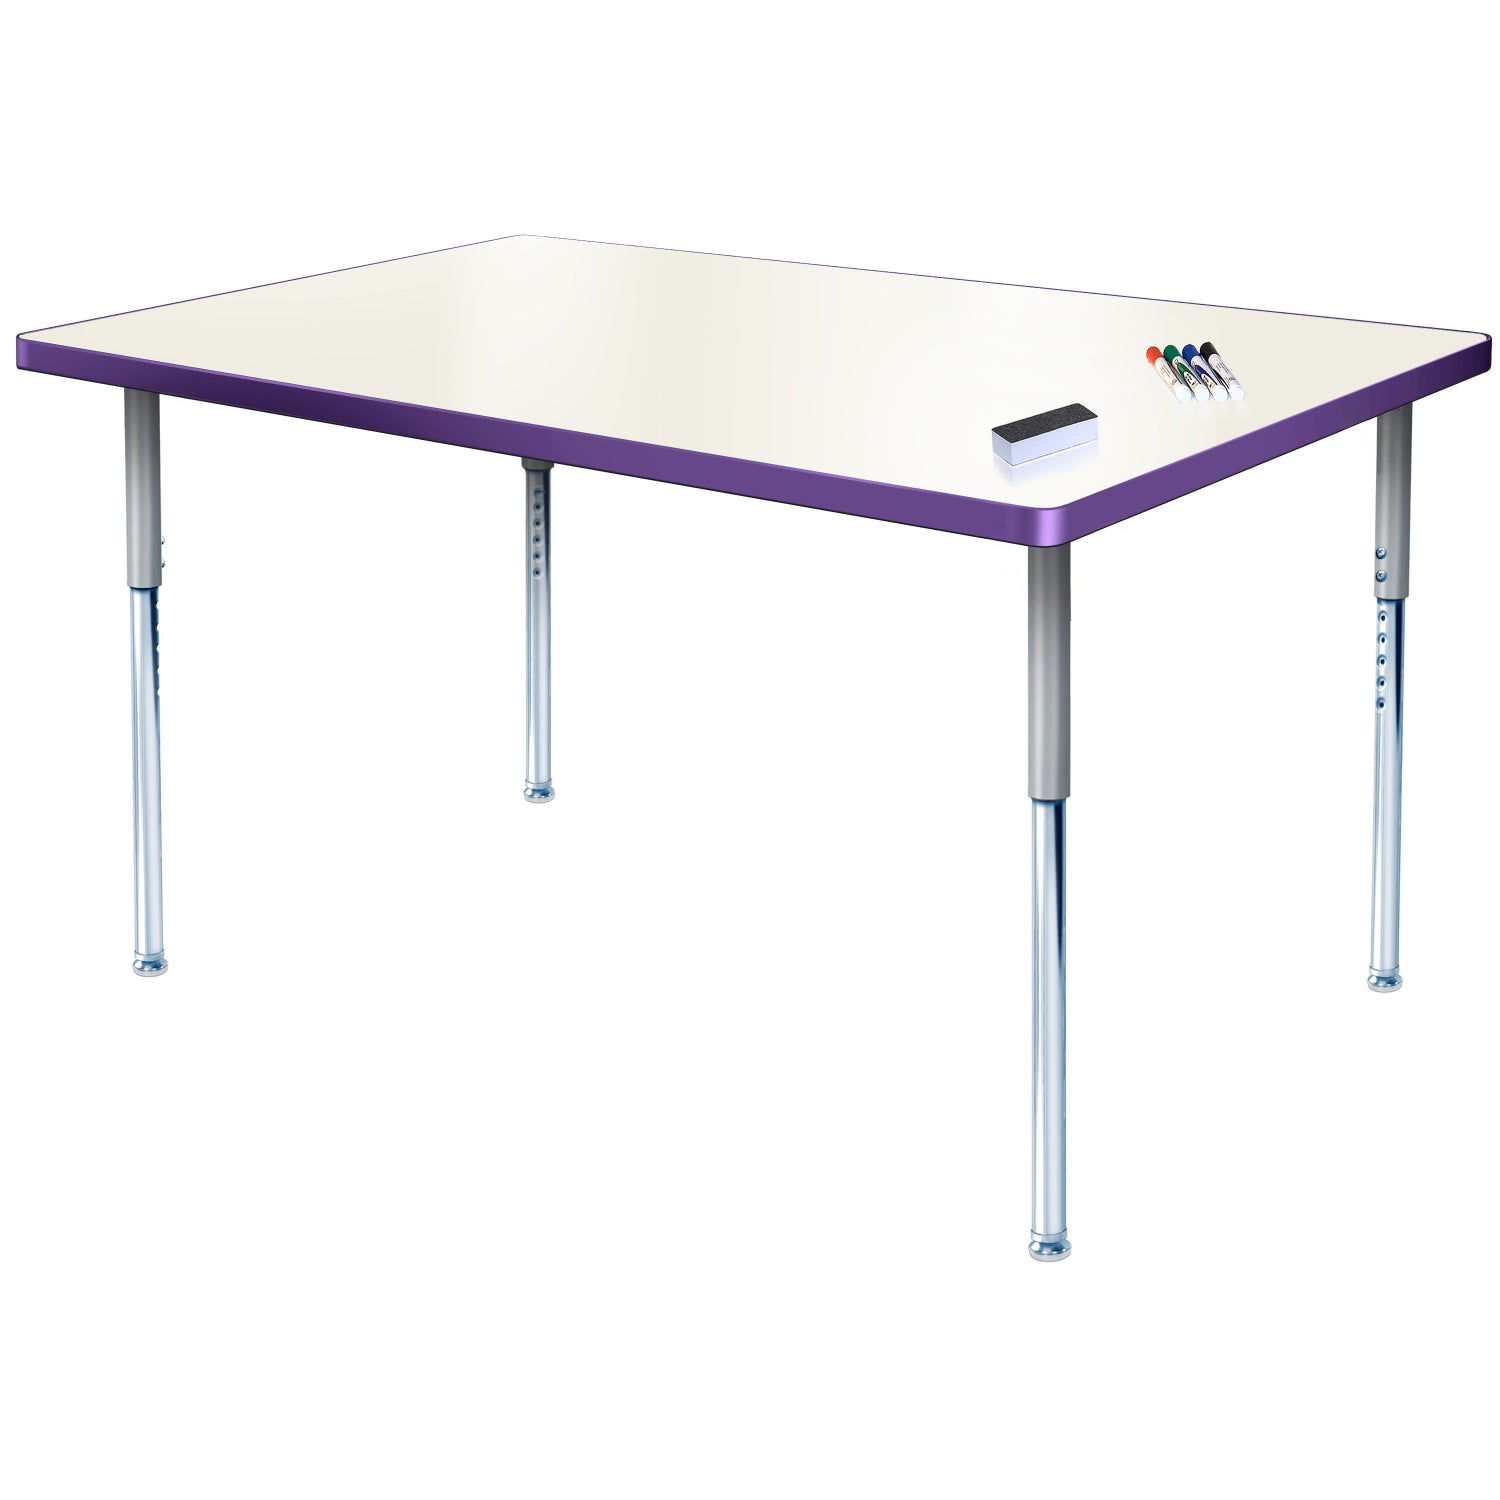 Imagination Station 36 x 72" Rectangular Activity Table with Dry Erase Markerboard Top, Modern Classic Adjustable Height Legs